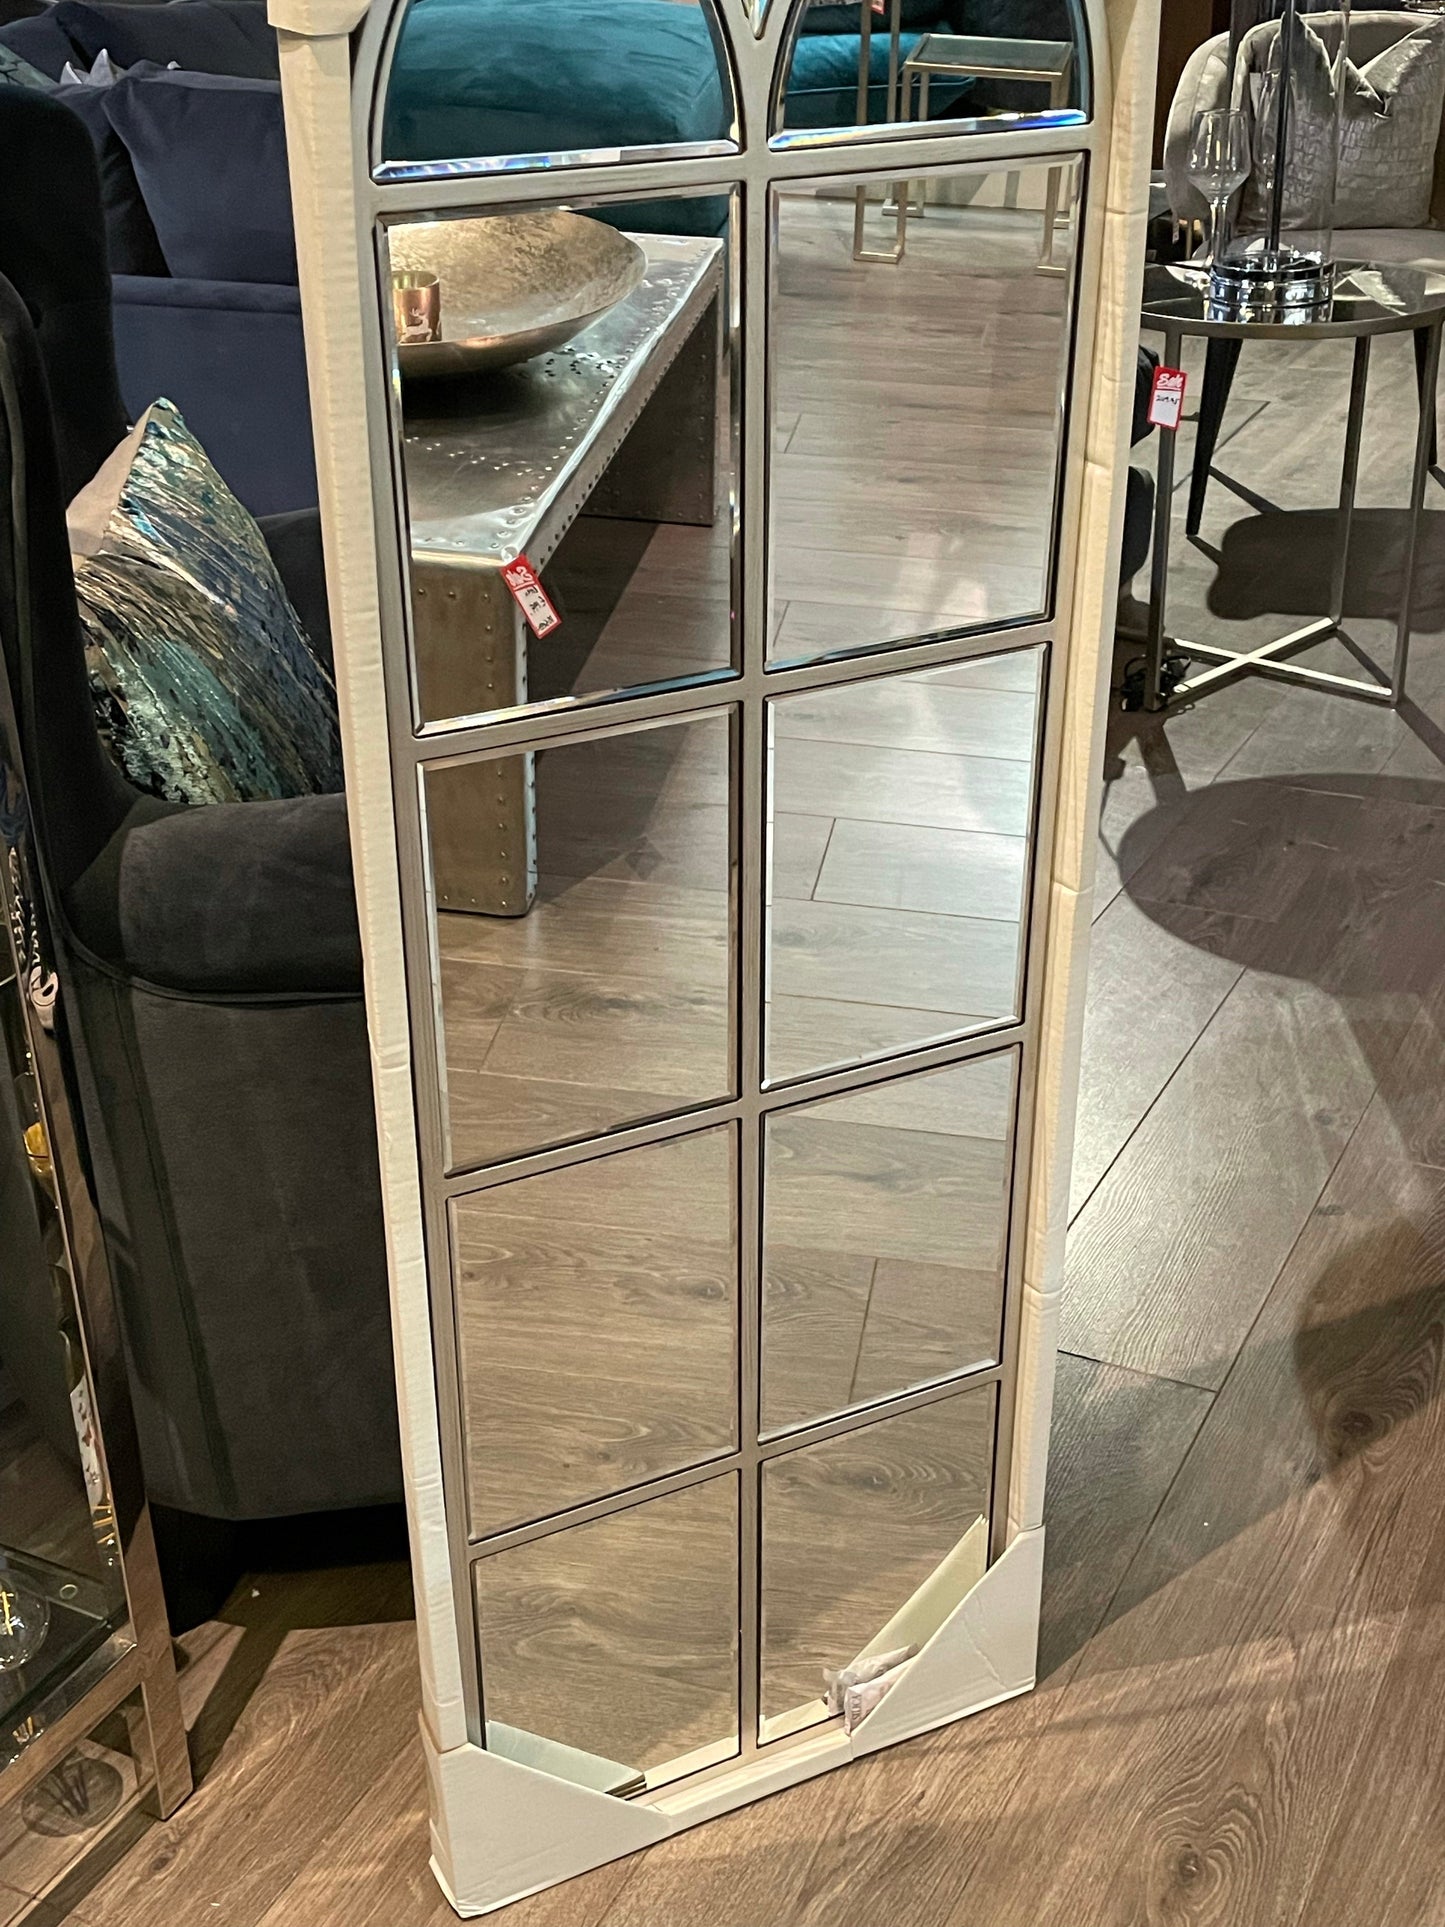 Paul large tall window mirror in champagne half price unwrapped on display